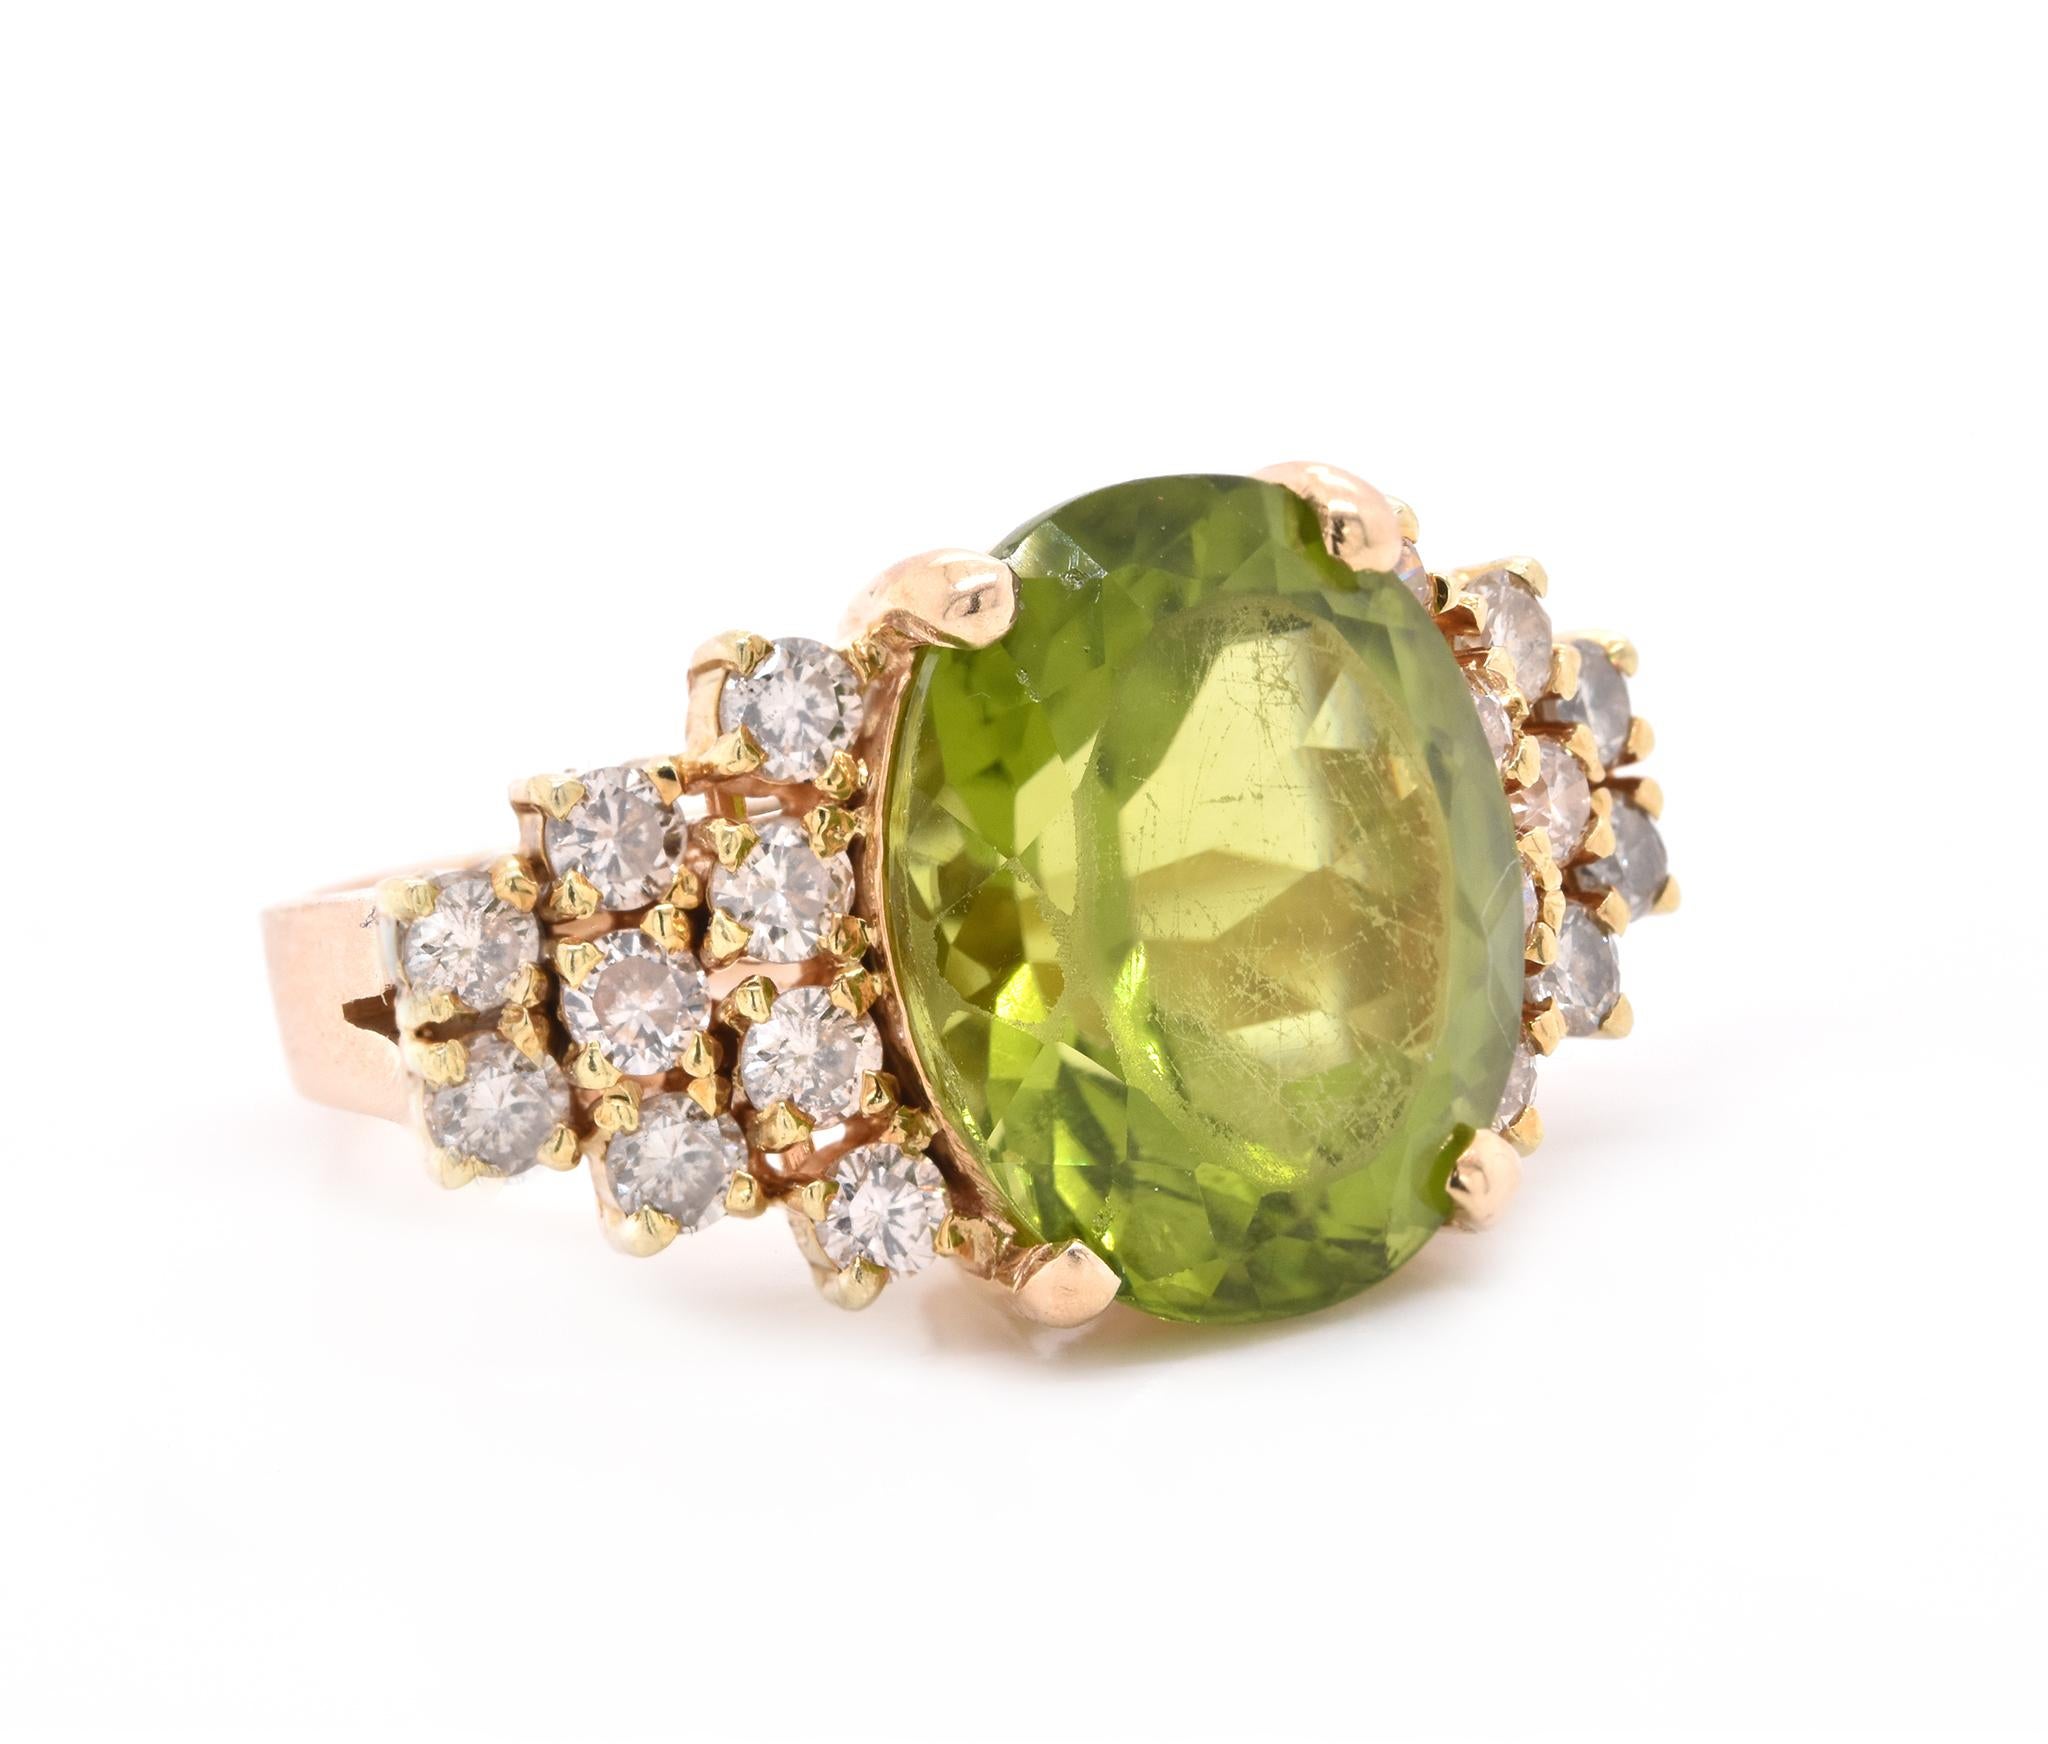 Designer: custom
Material: 14K yellow gold
Peridot: 1 oval cut = 7.37ct 
Diamond: 18 round cut = .90cttw
Color: I
Clarity: SI2
Ring Size: 5.25 (please allow up to 2 additional business days for sizing requests)
Dimensions: ring shank measures